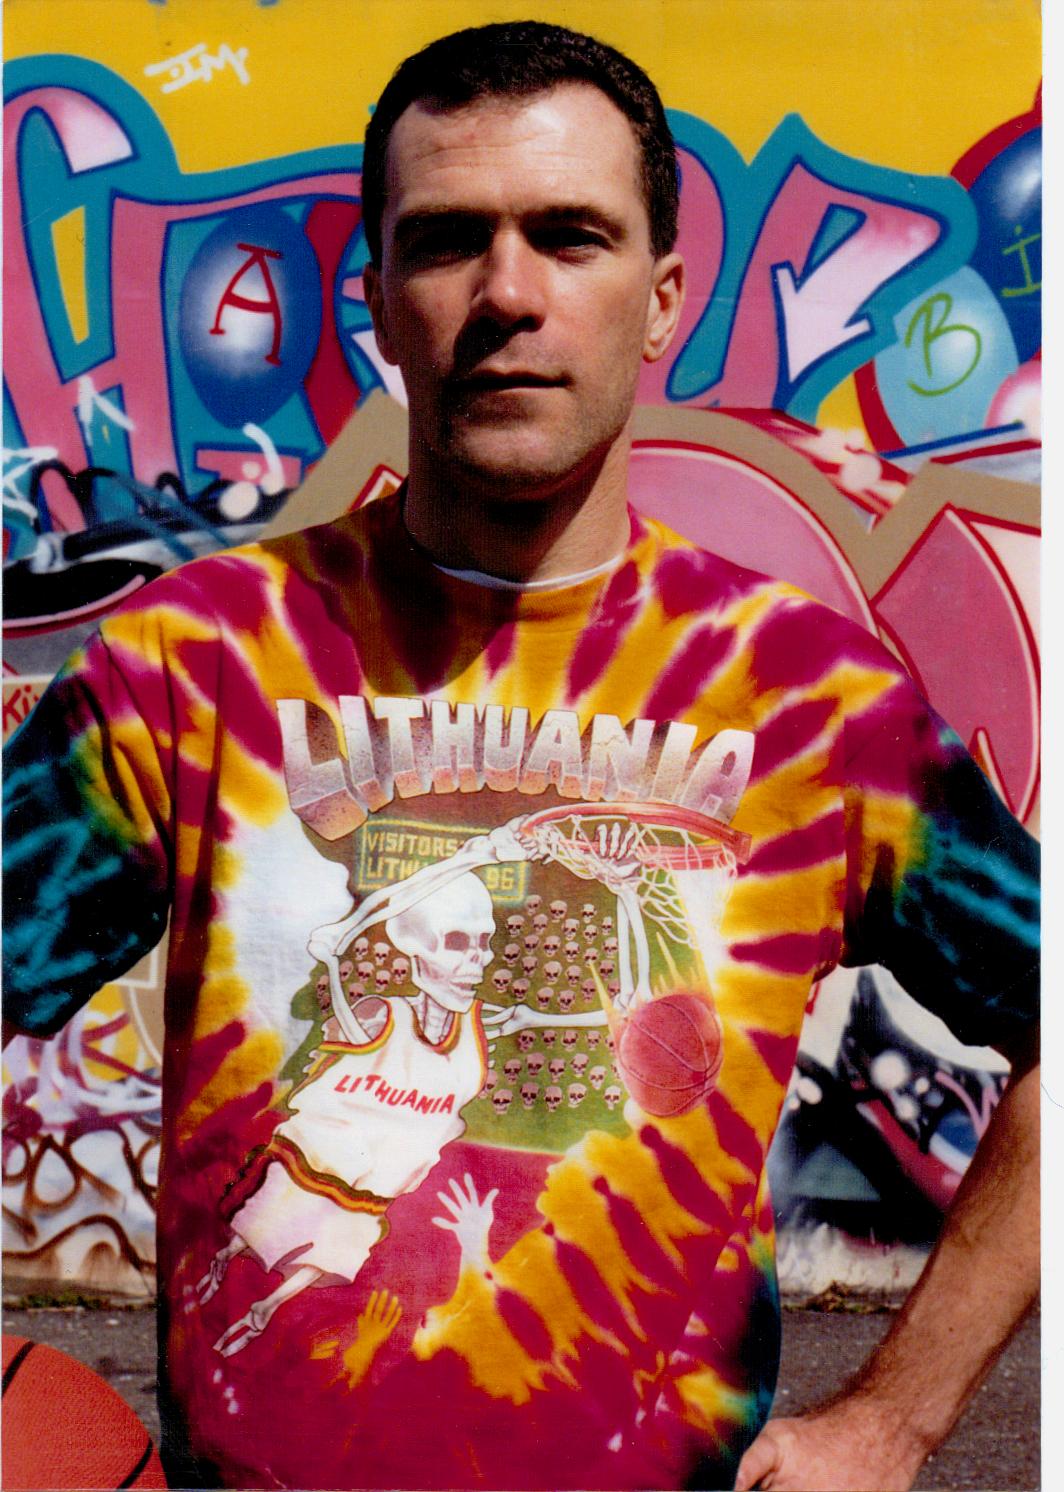 Greg Speirs (Skullman) creator of the iconic Lithuanian Basketball Tie Dyed Skeleton warm-ups featured in The Other Dream Team documentary film.